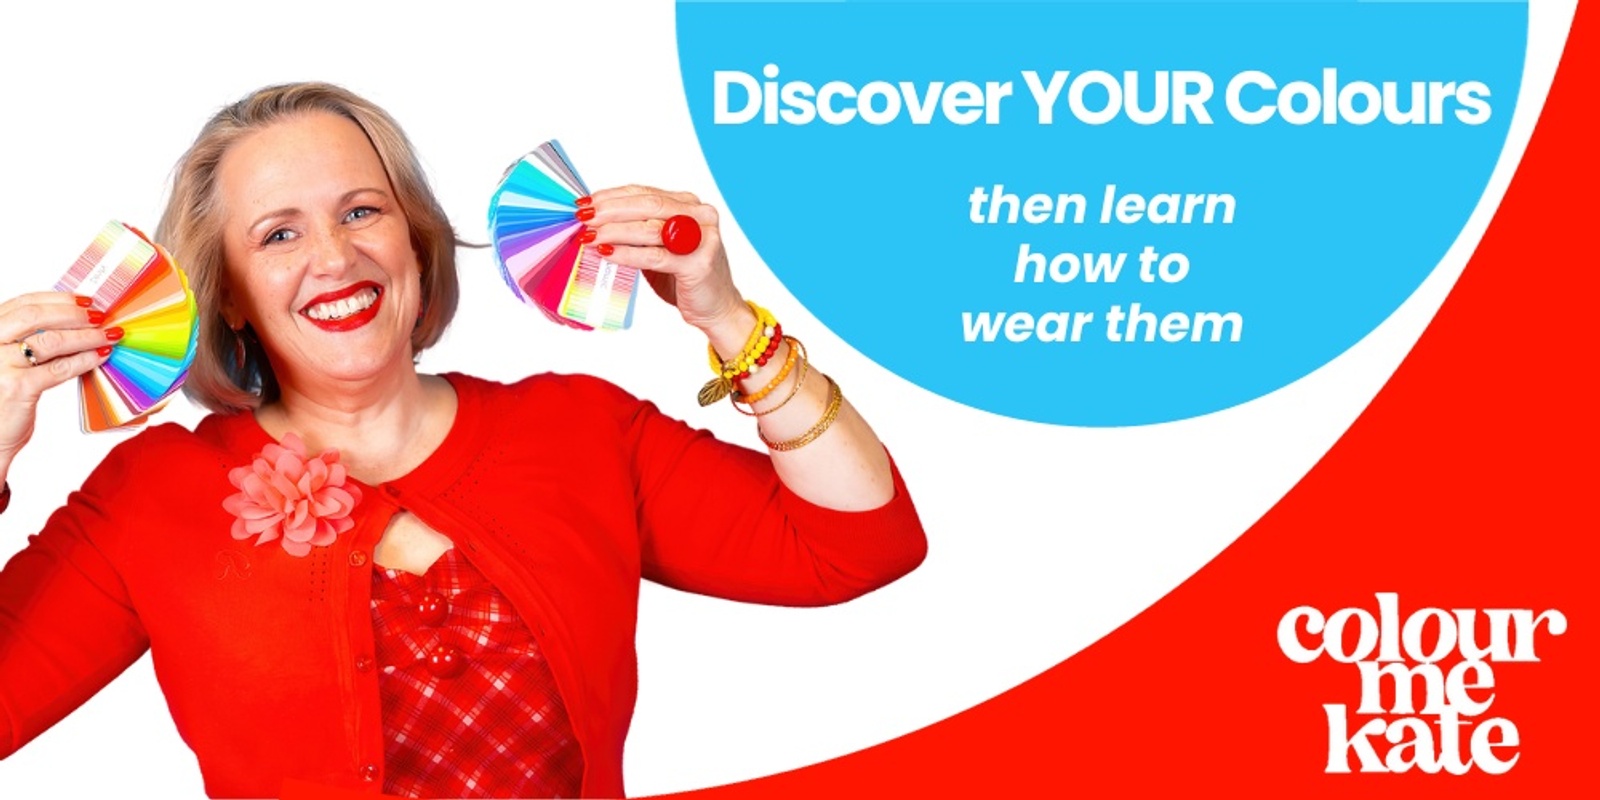 Banner image for Colour Analysis - discover your colours then learn how to wear them